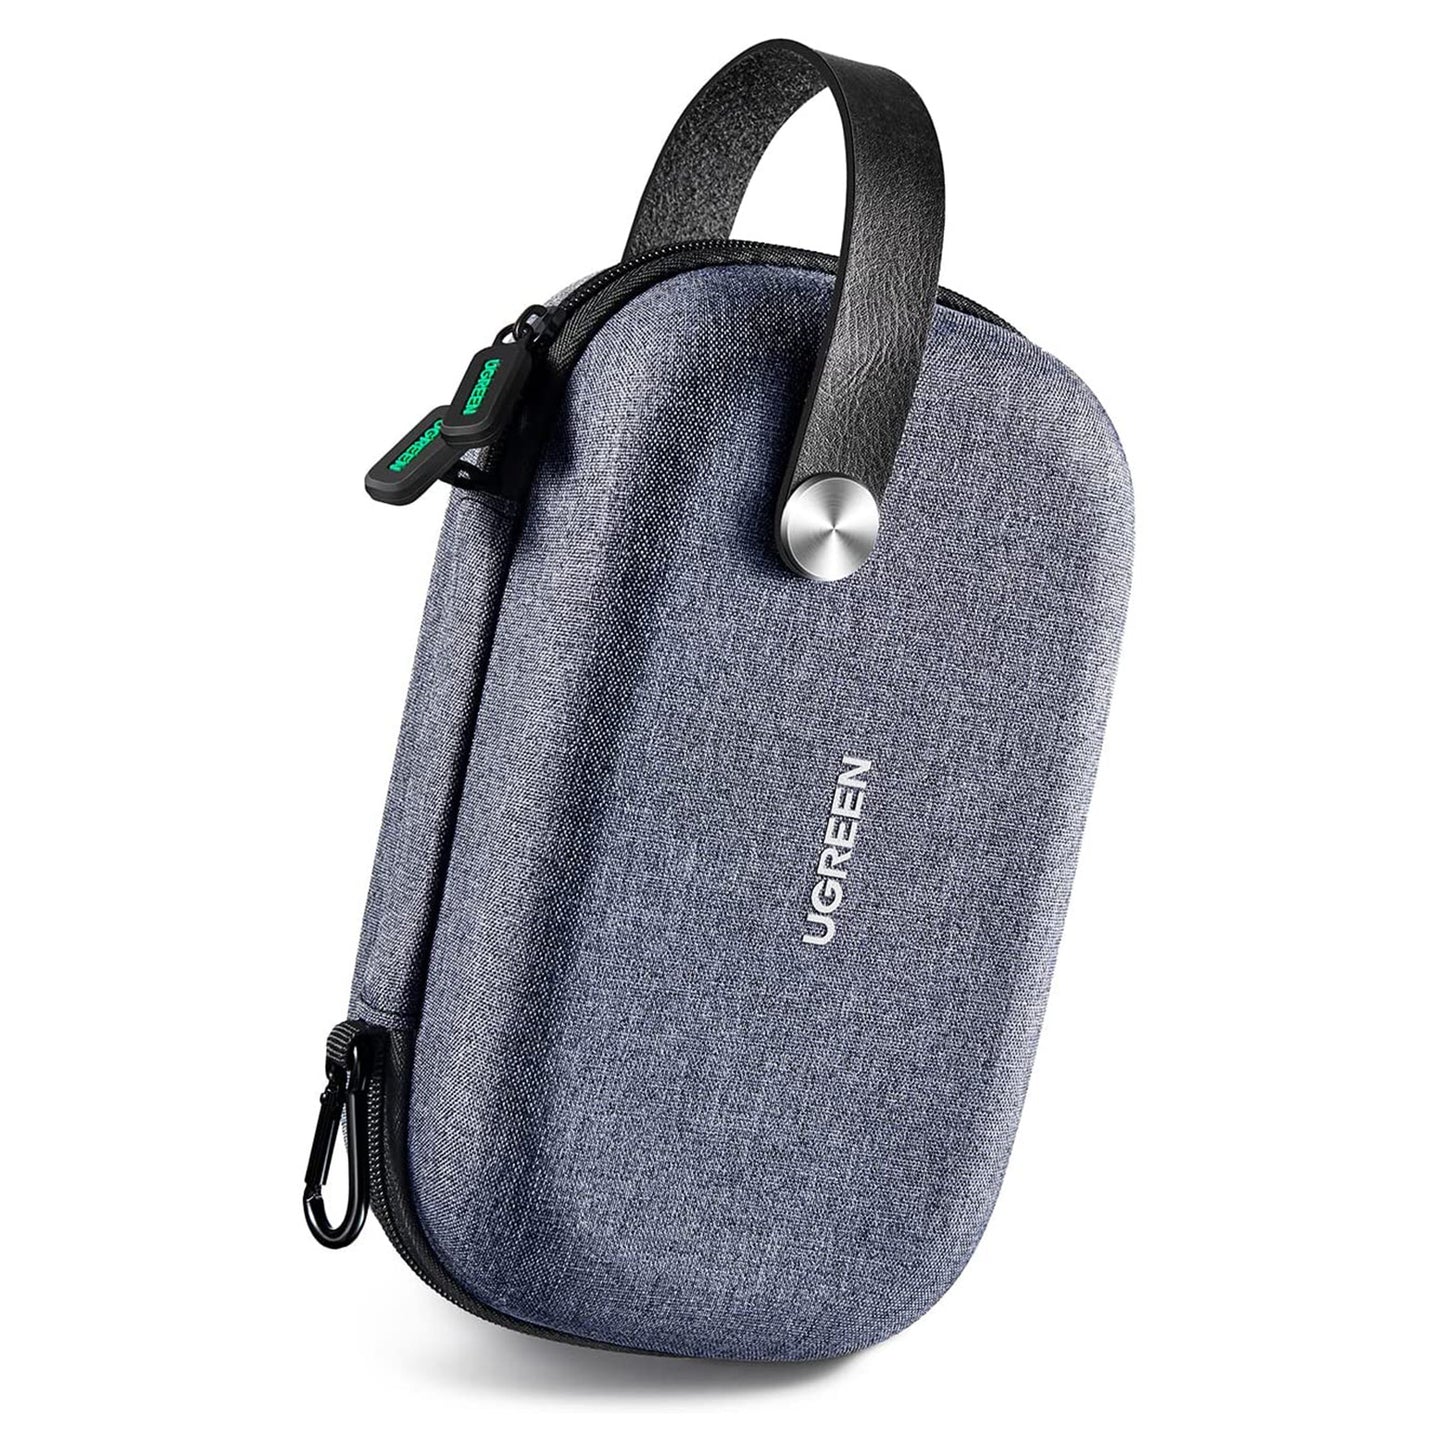 UGREEN Waterproof Shockproof Hard Case Travel Storage Organizer Bag for Gadgets HDD Hard Drive Data Cable Charger